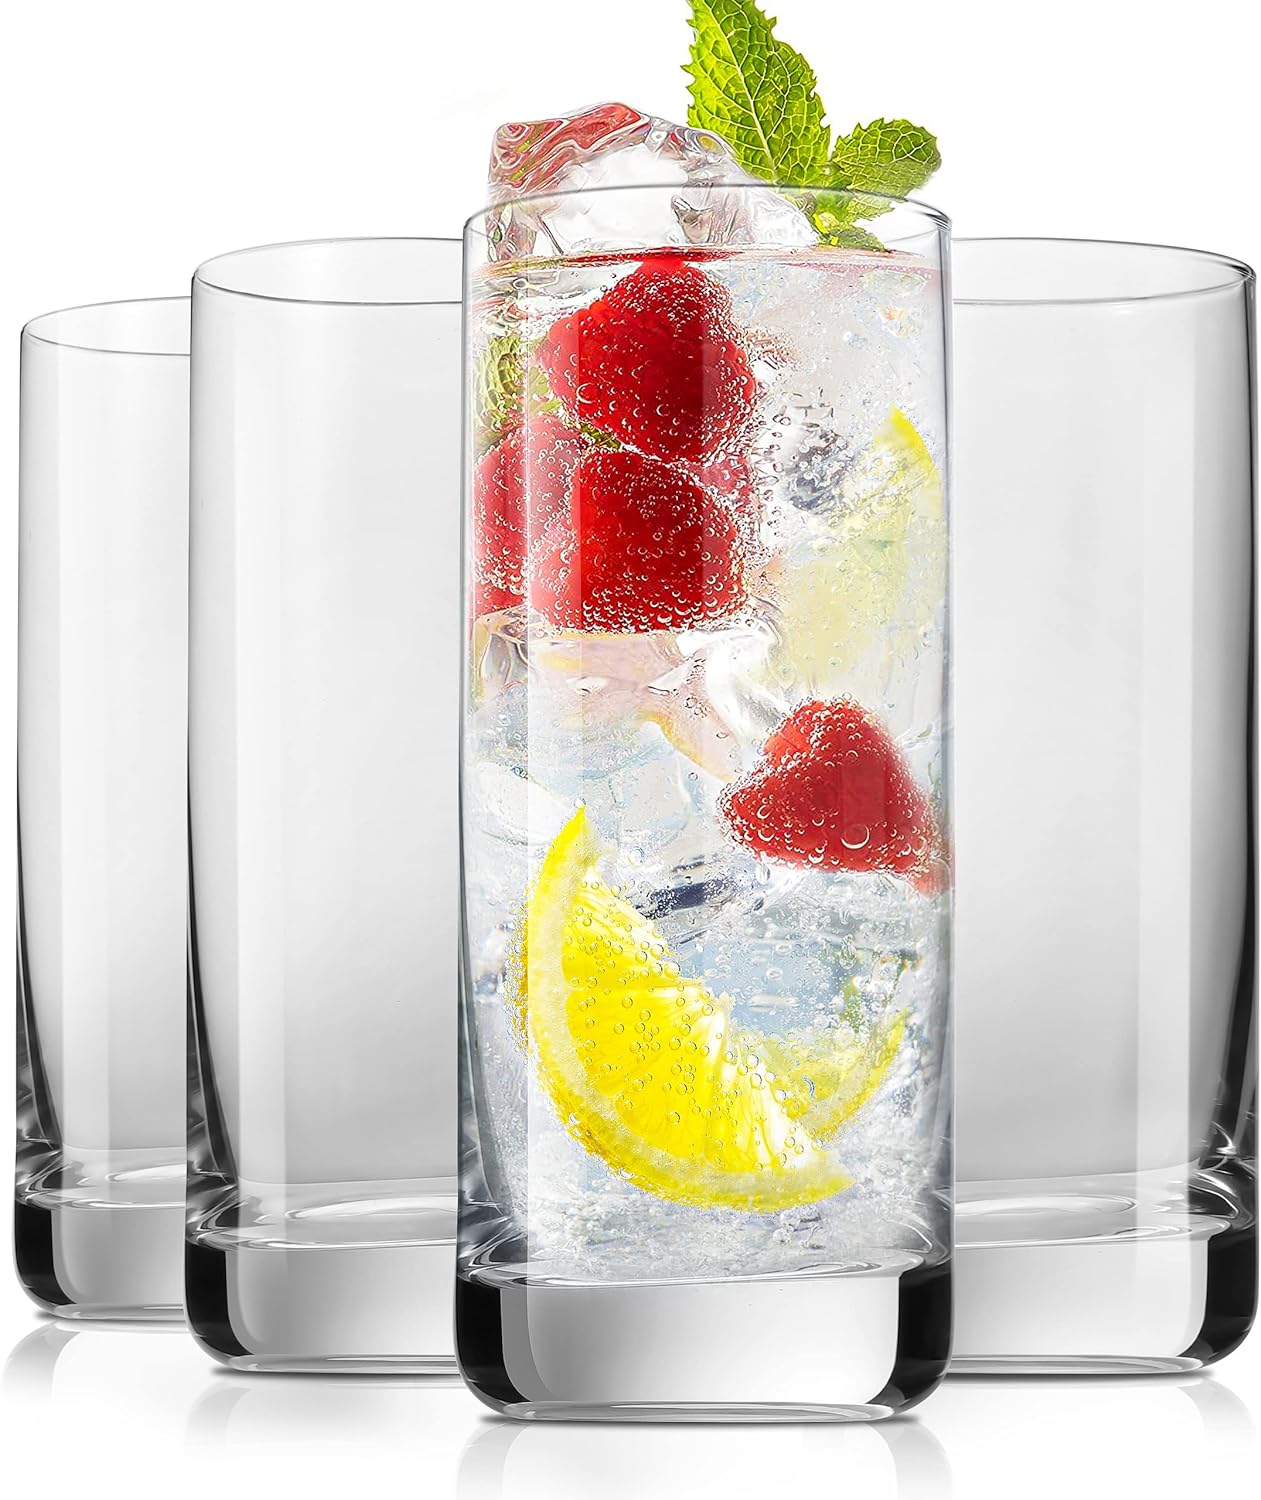 Highball Drinking Glasses Set of 4, Lead-Free Water Glasses. 13oz Tall Drink Glasses